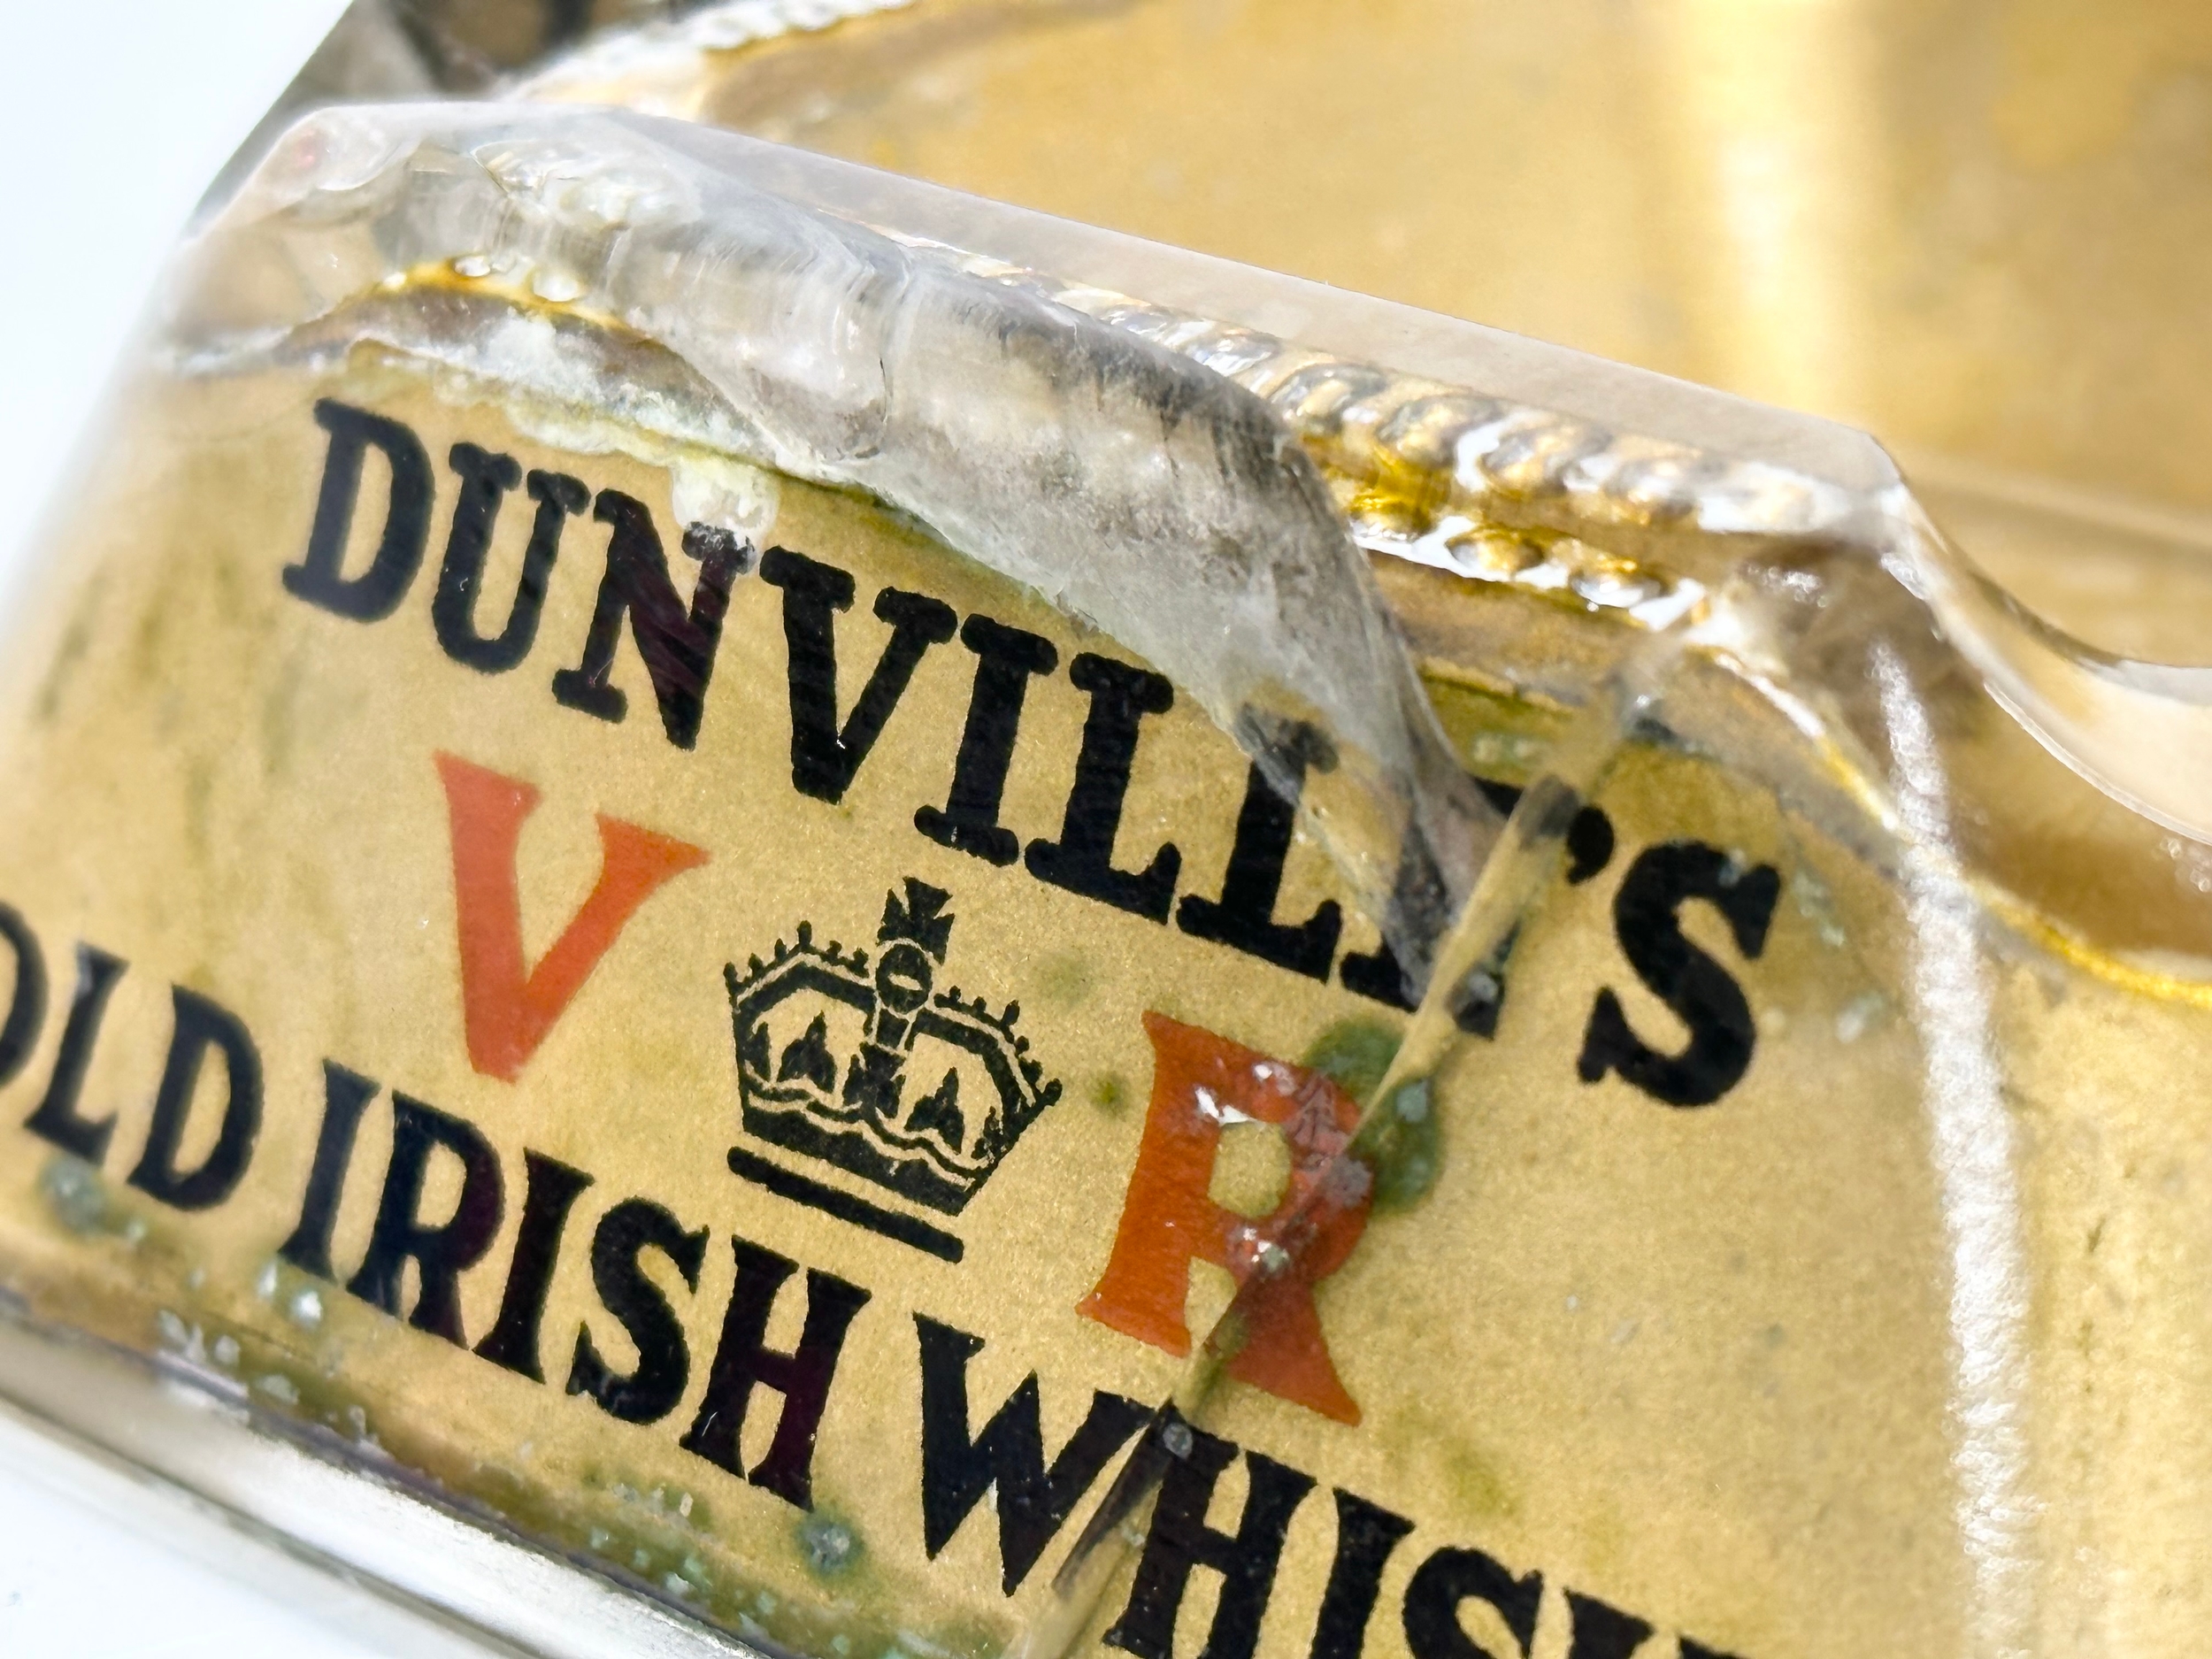 A rare Dunville’s Old Irish Whisky glass ashtray. 11.5x11.5x4cm - Image 5 of 6